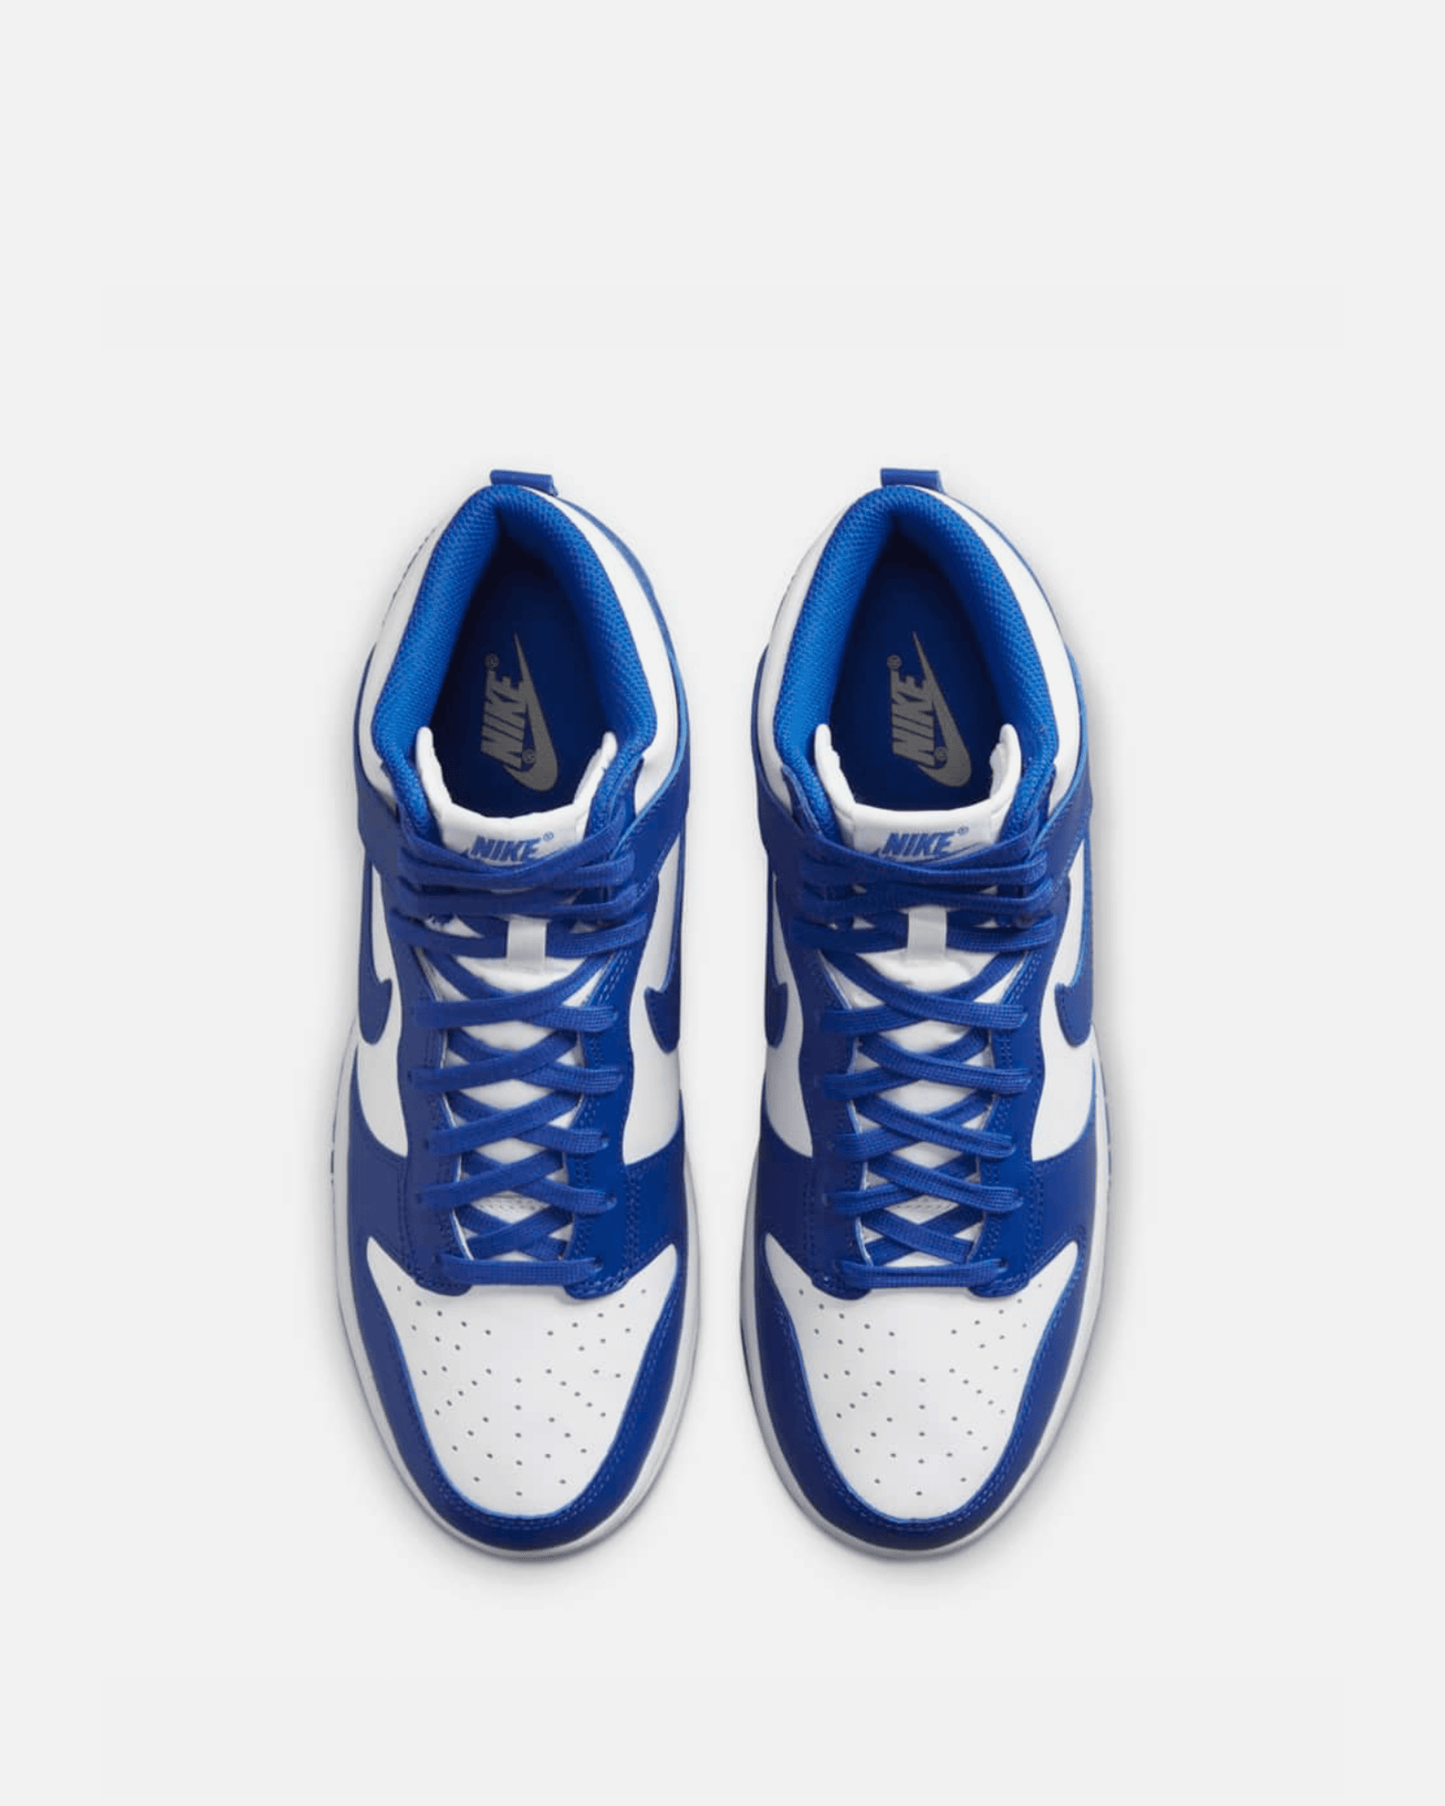 Nike Releases Dunk High 'Game Royal'